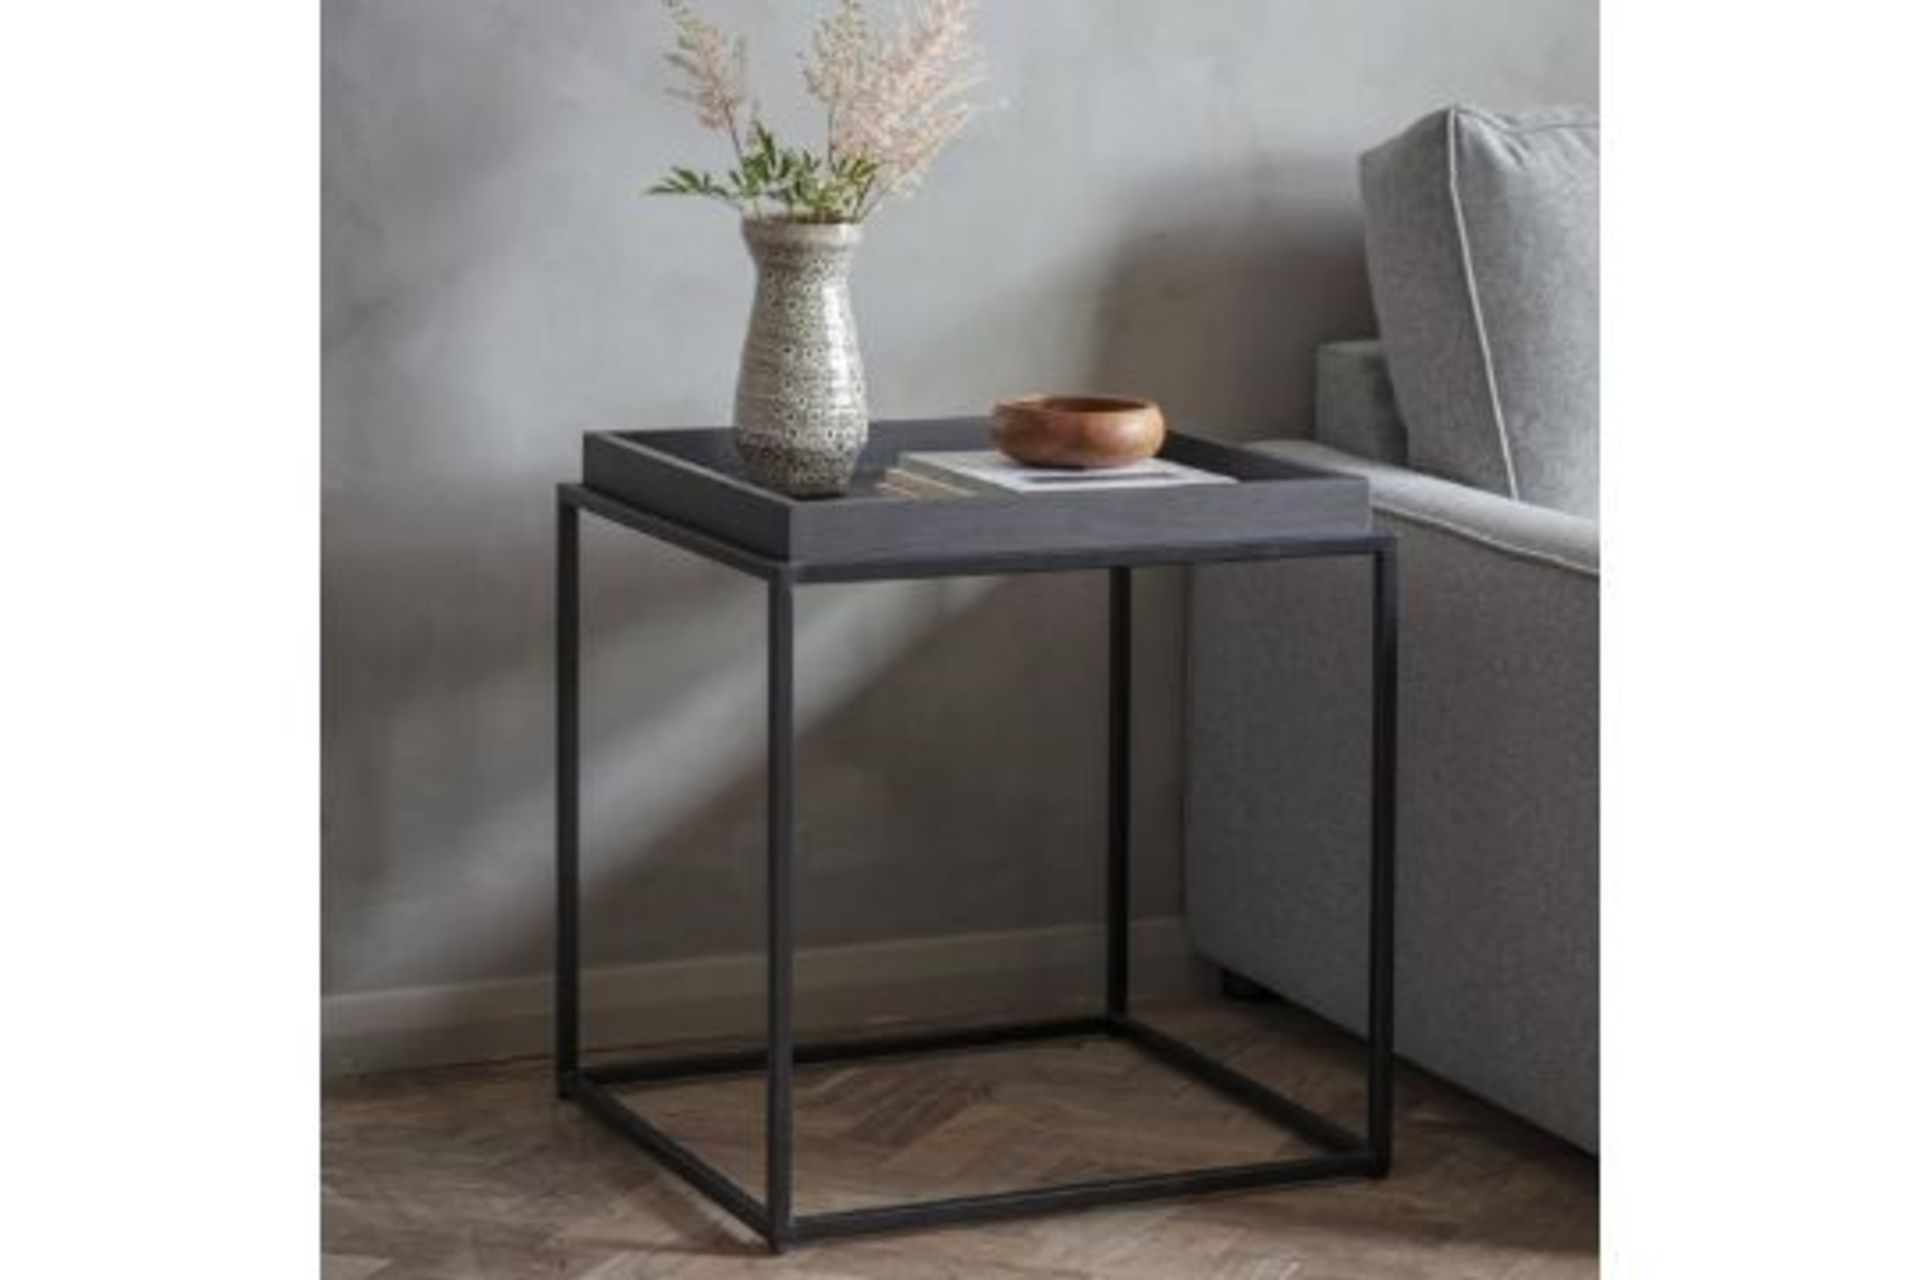 Forden Tray Side Table Black The Simple Angular Black Metal Frame Allows A Clear View Of The Floor - Image 3 of 3